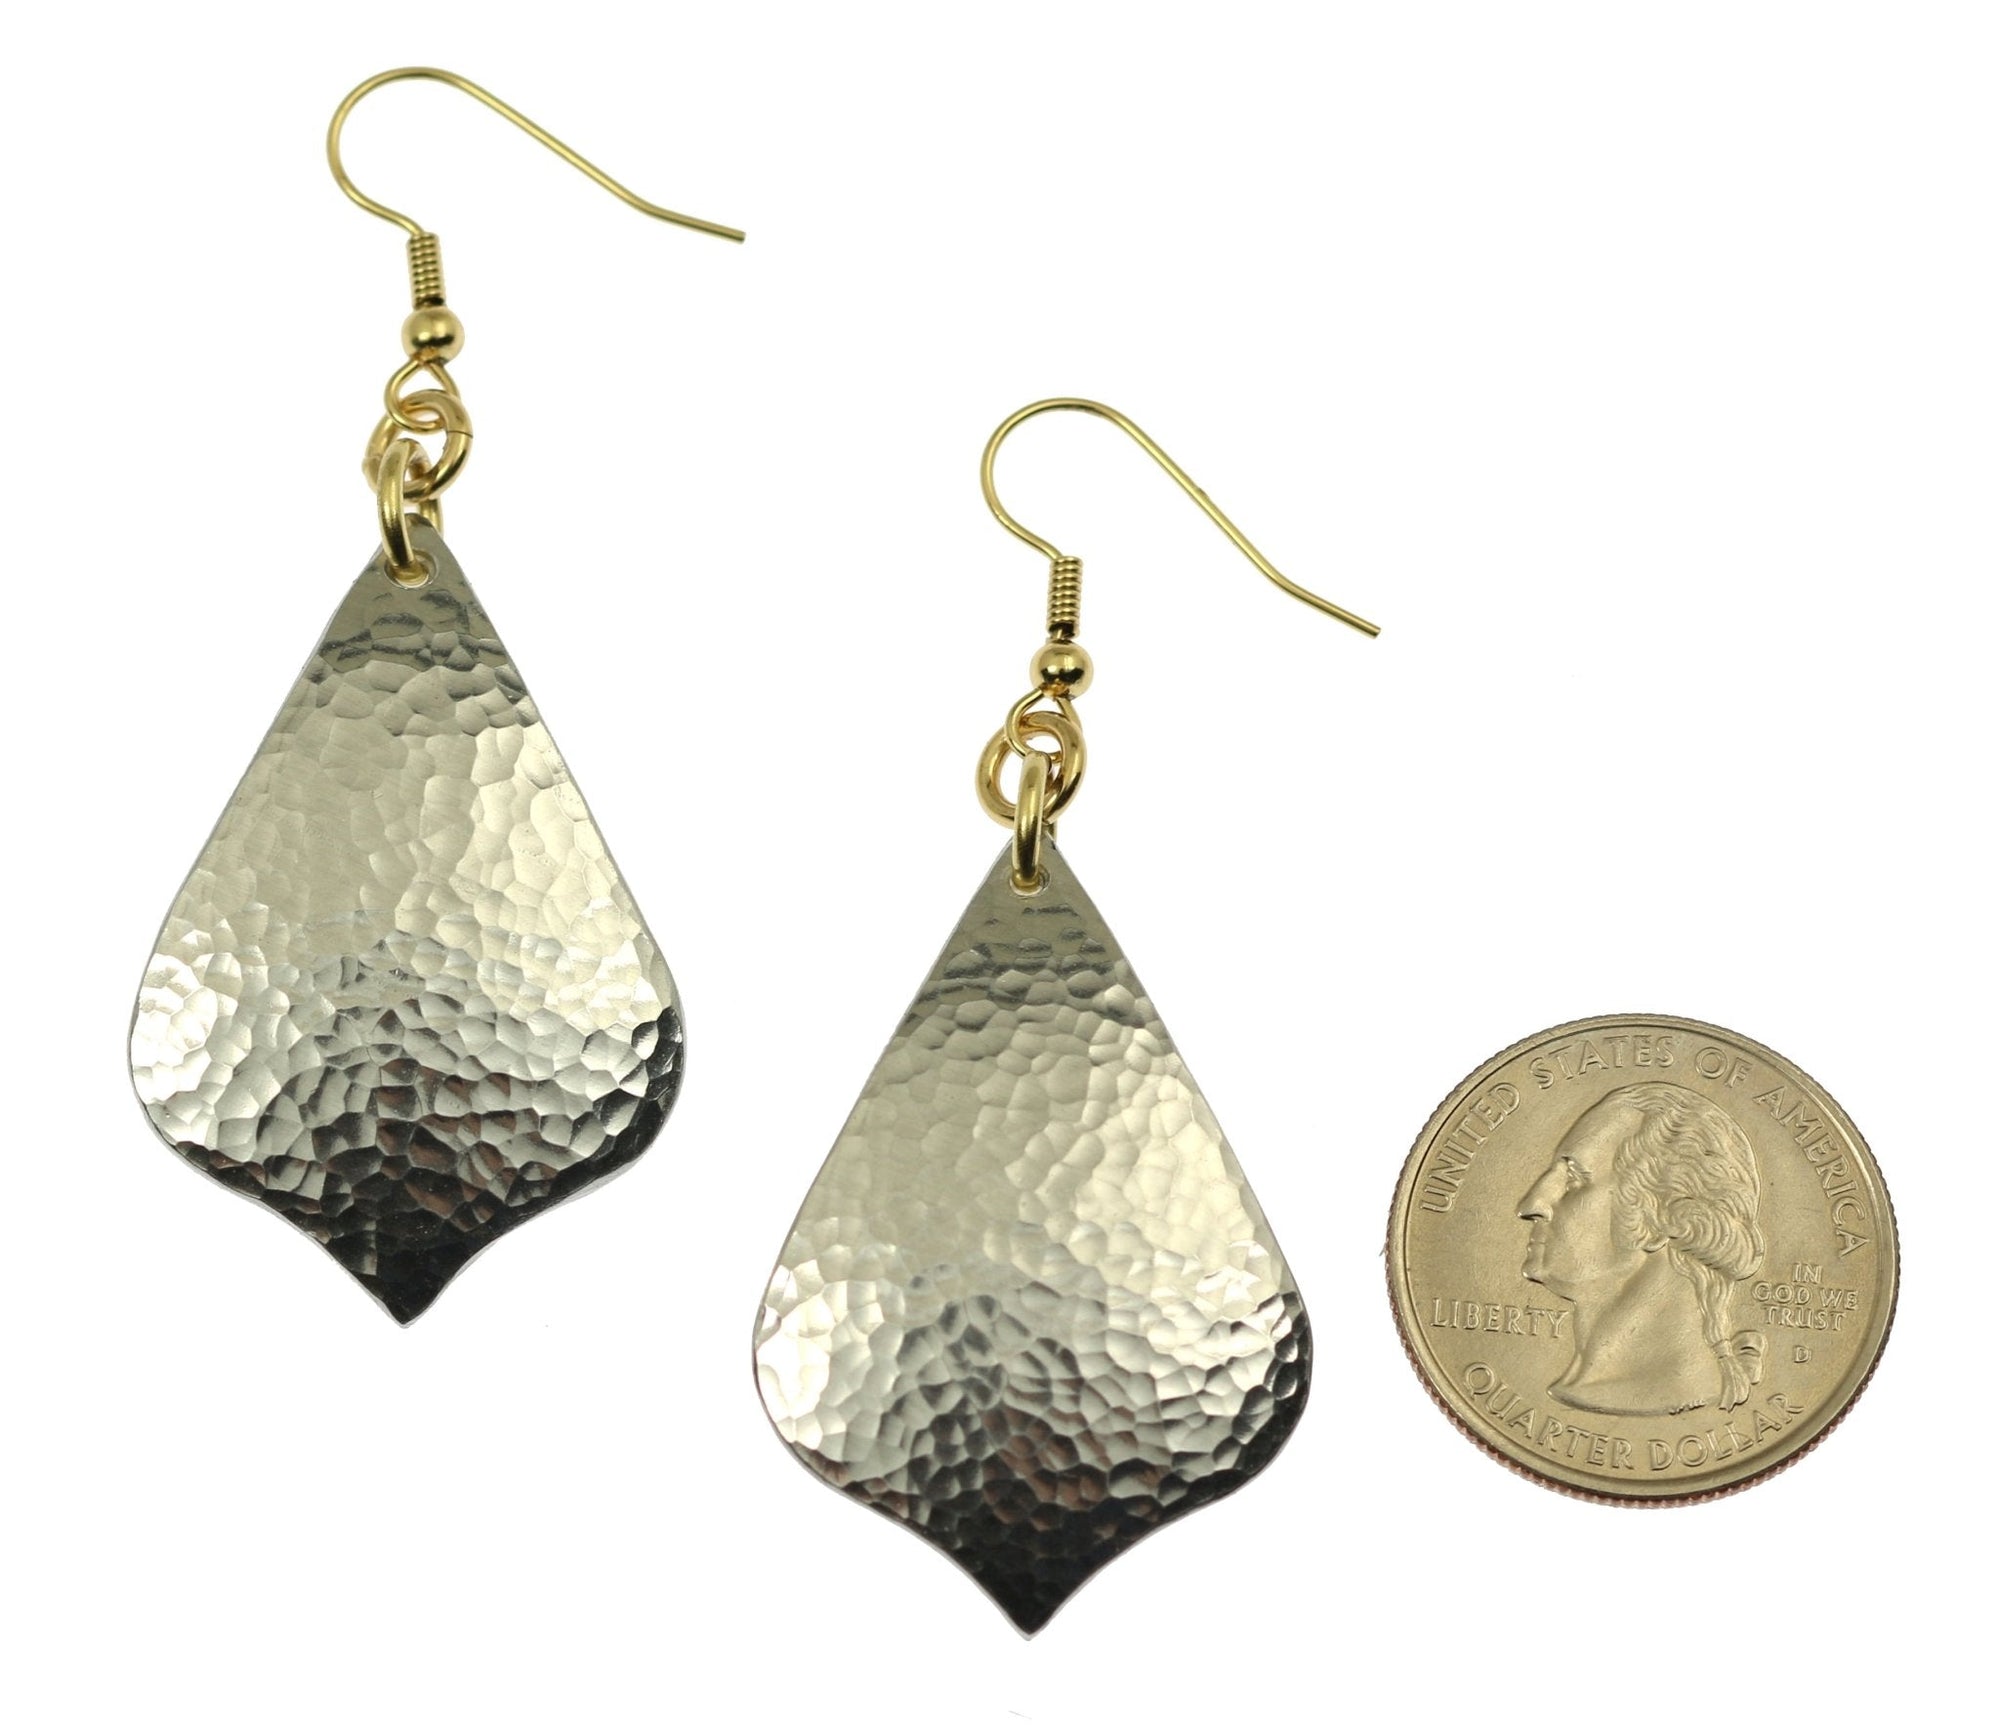 Size of Hammered Aluminum Arabesque Drop Earrings